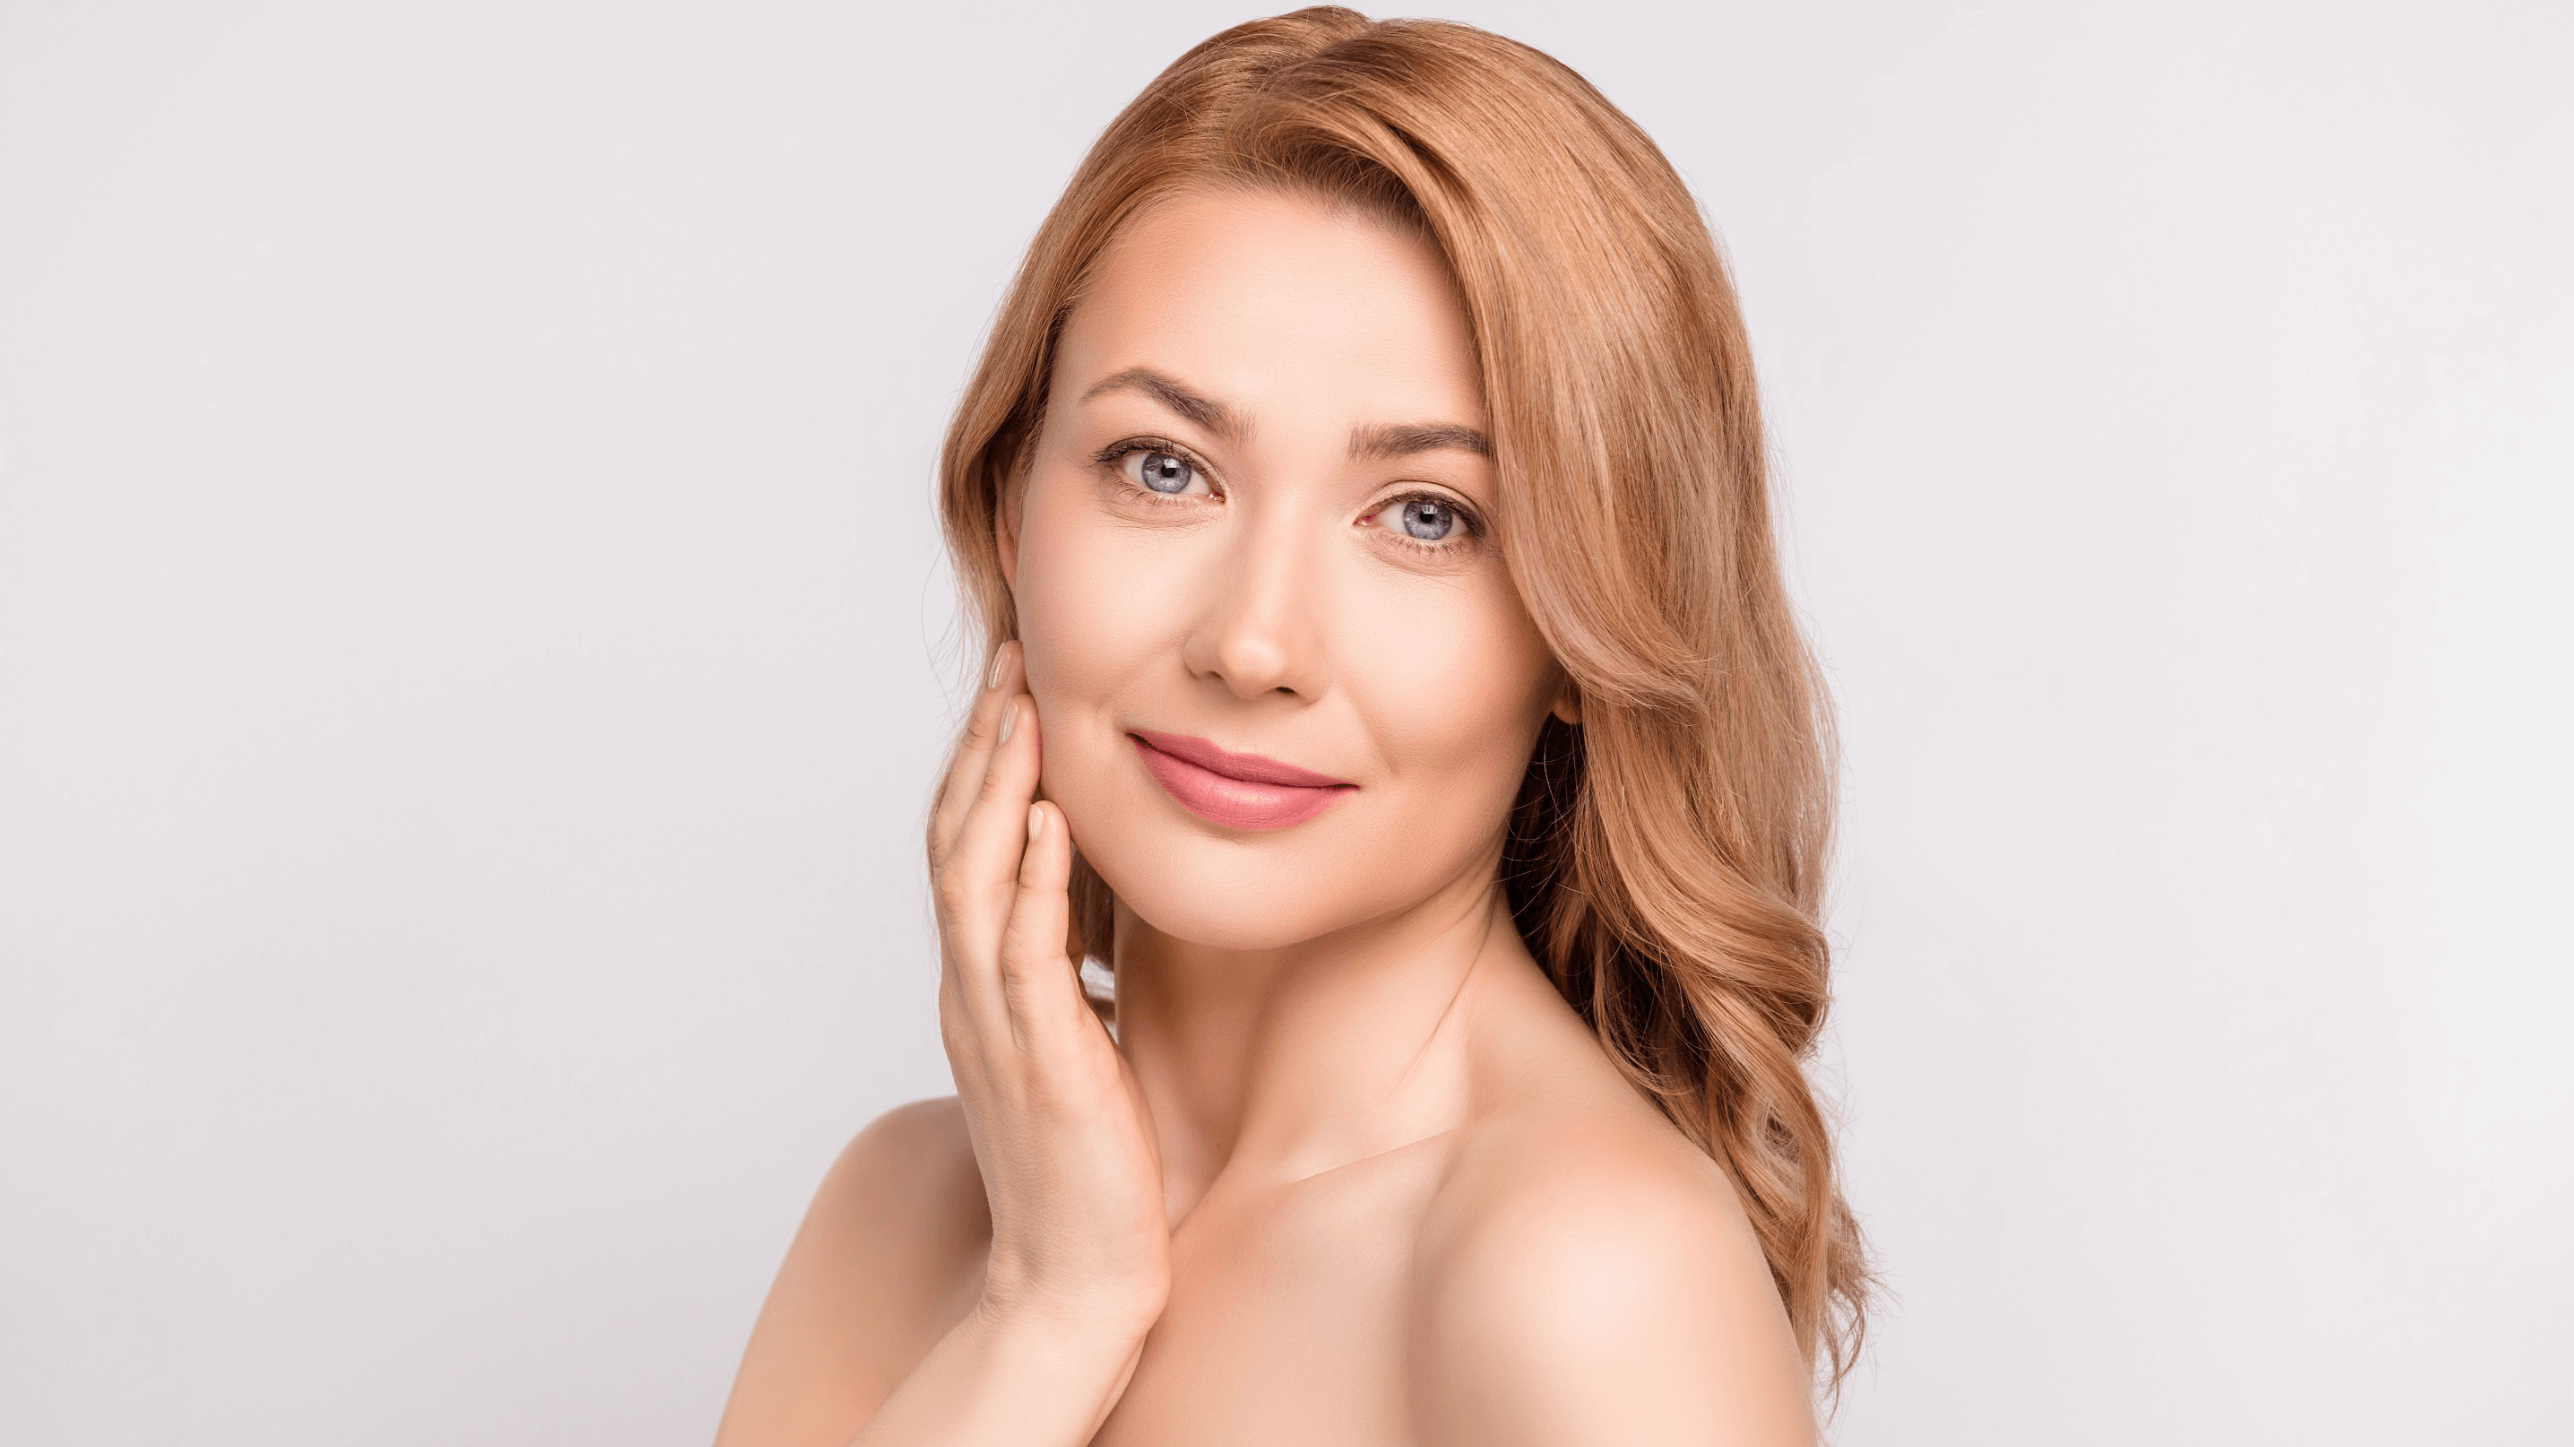 Can BOTOX® at an Early Age Help Prevent Future Wrinkles?